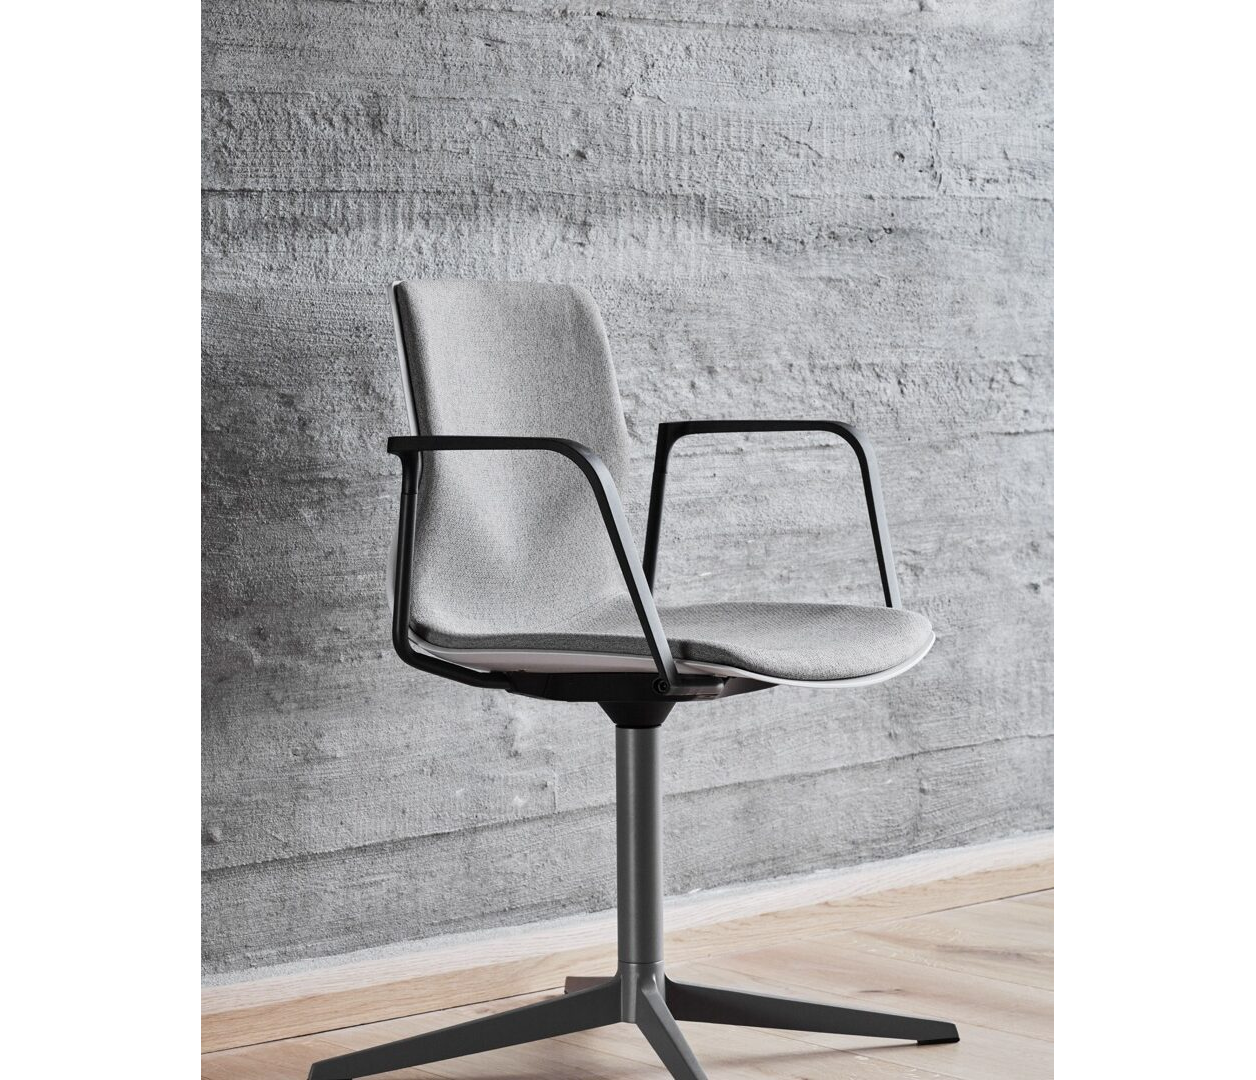 OCEE&FOUR – Chairs – FourSure 99 – Lifestyle Image 2 Large